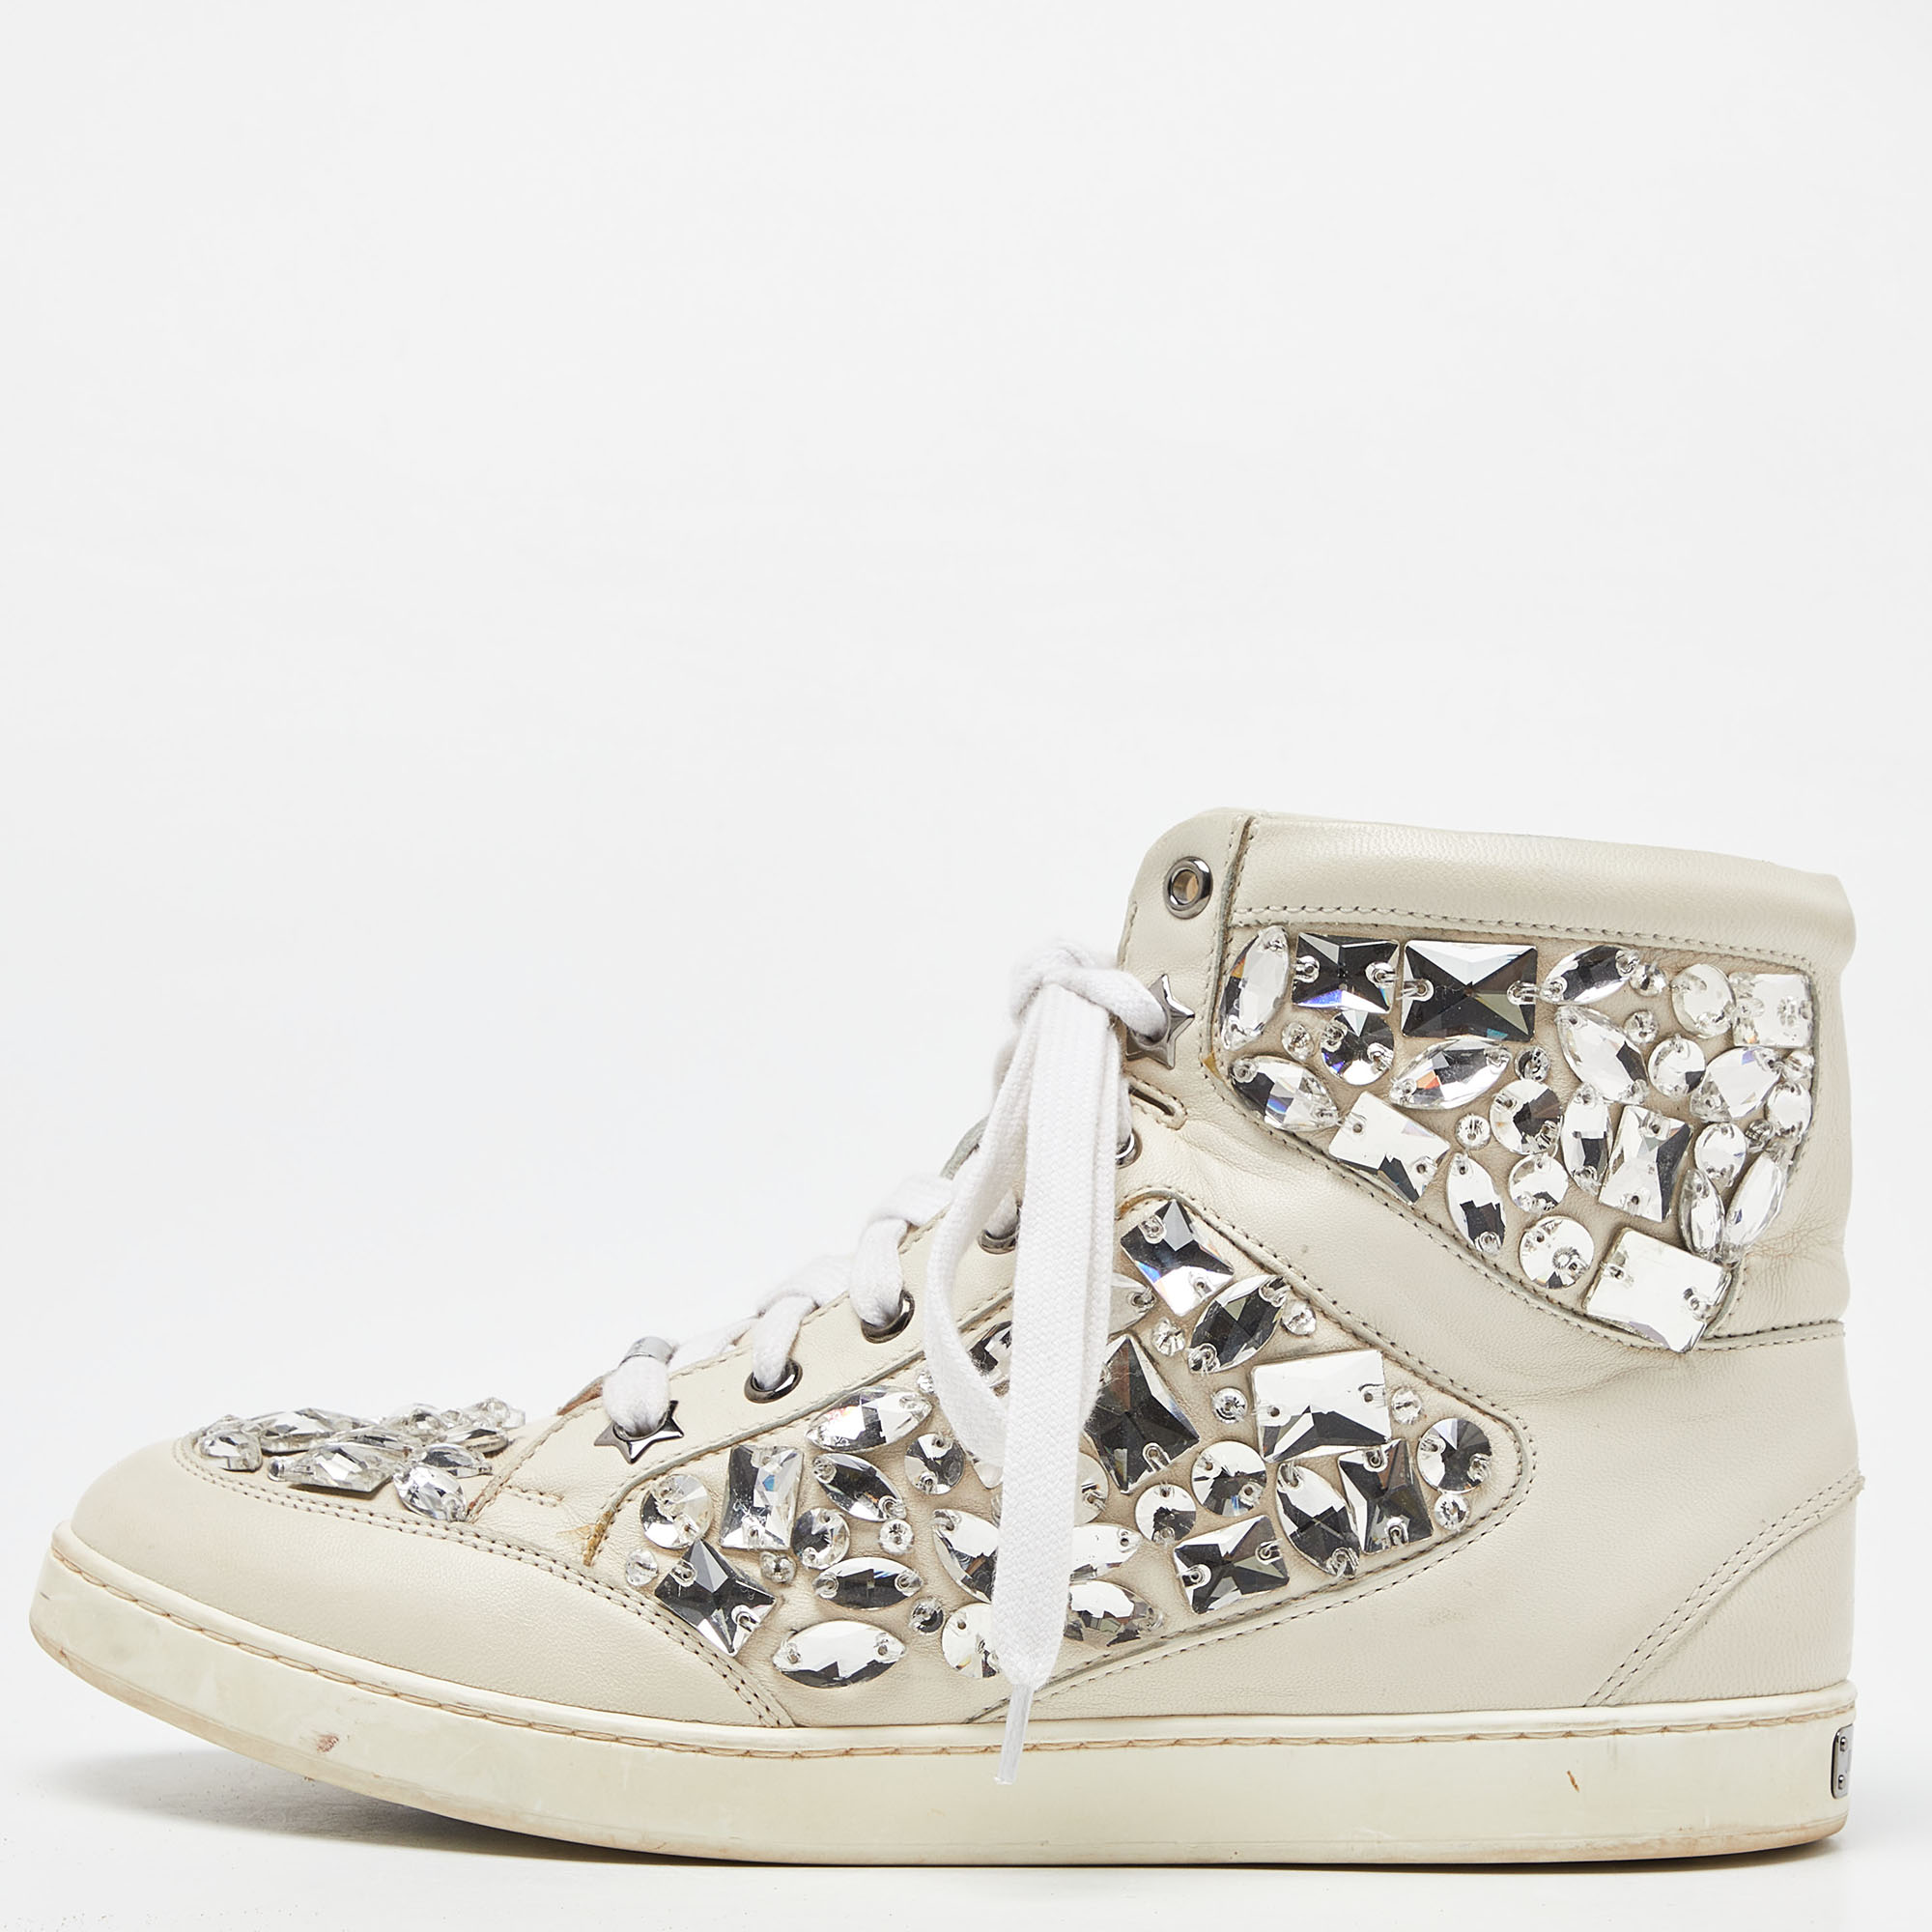 Jimmy choo white leather tokyo crystal embellished high top sneakers size 37.5